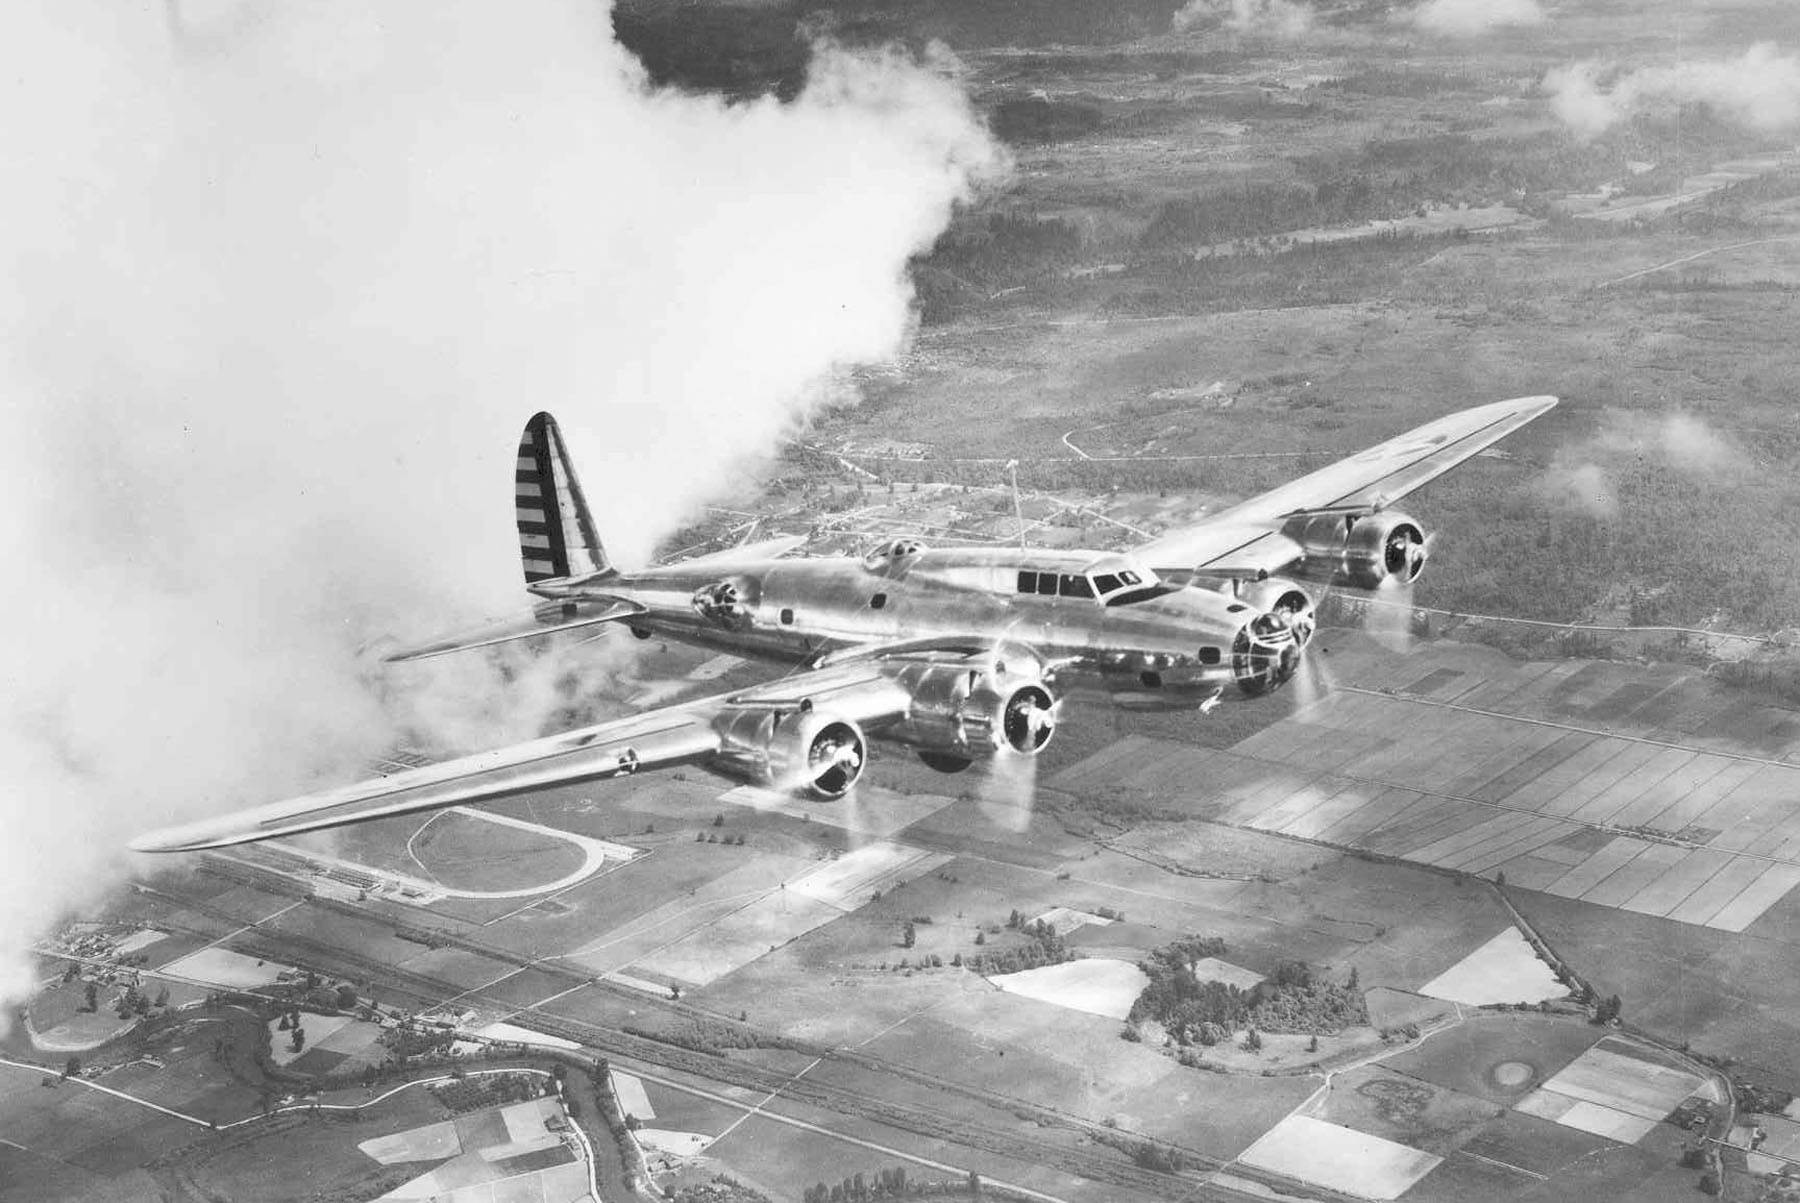 Boeing YB-17 Flying Fortress 36-149. (U.S. Air Force)